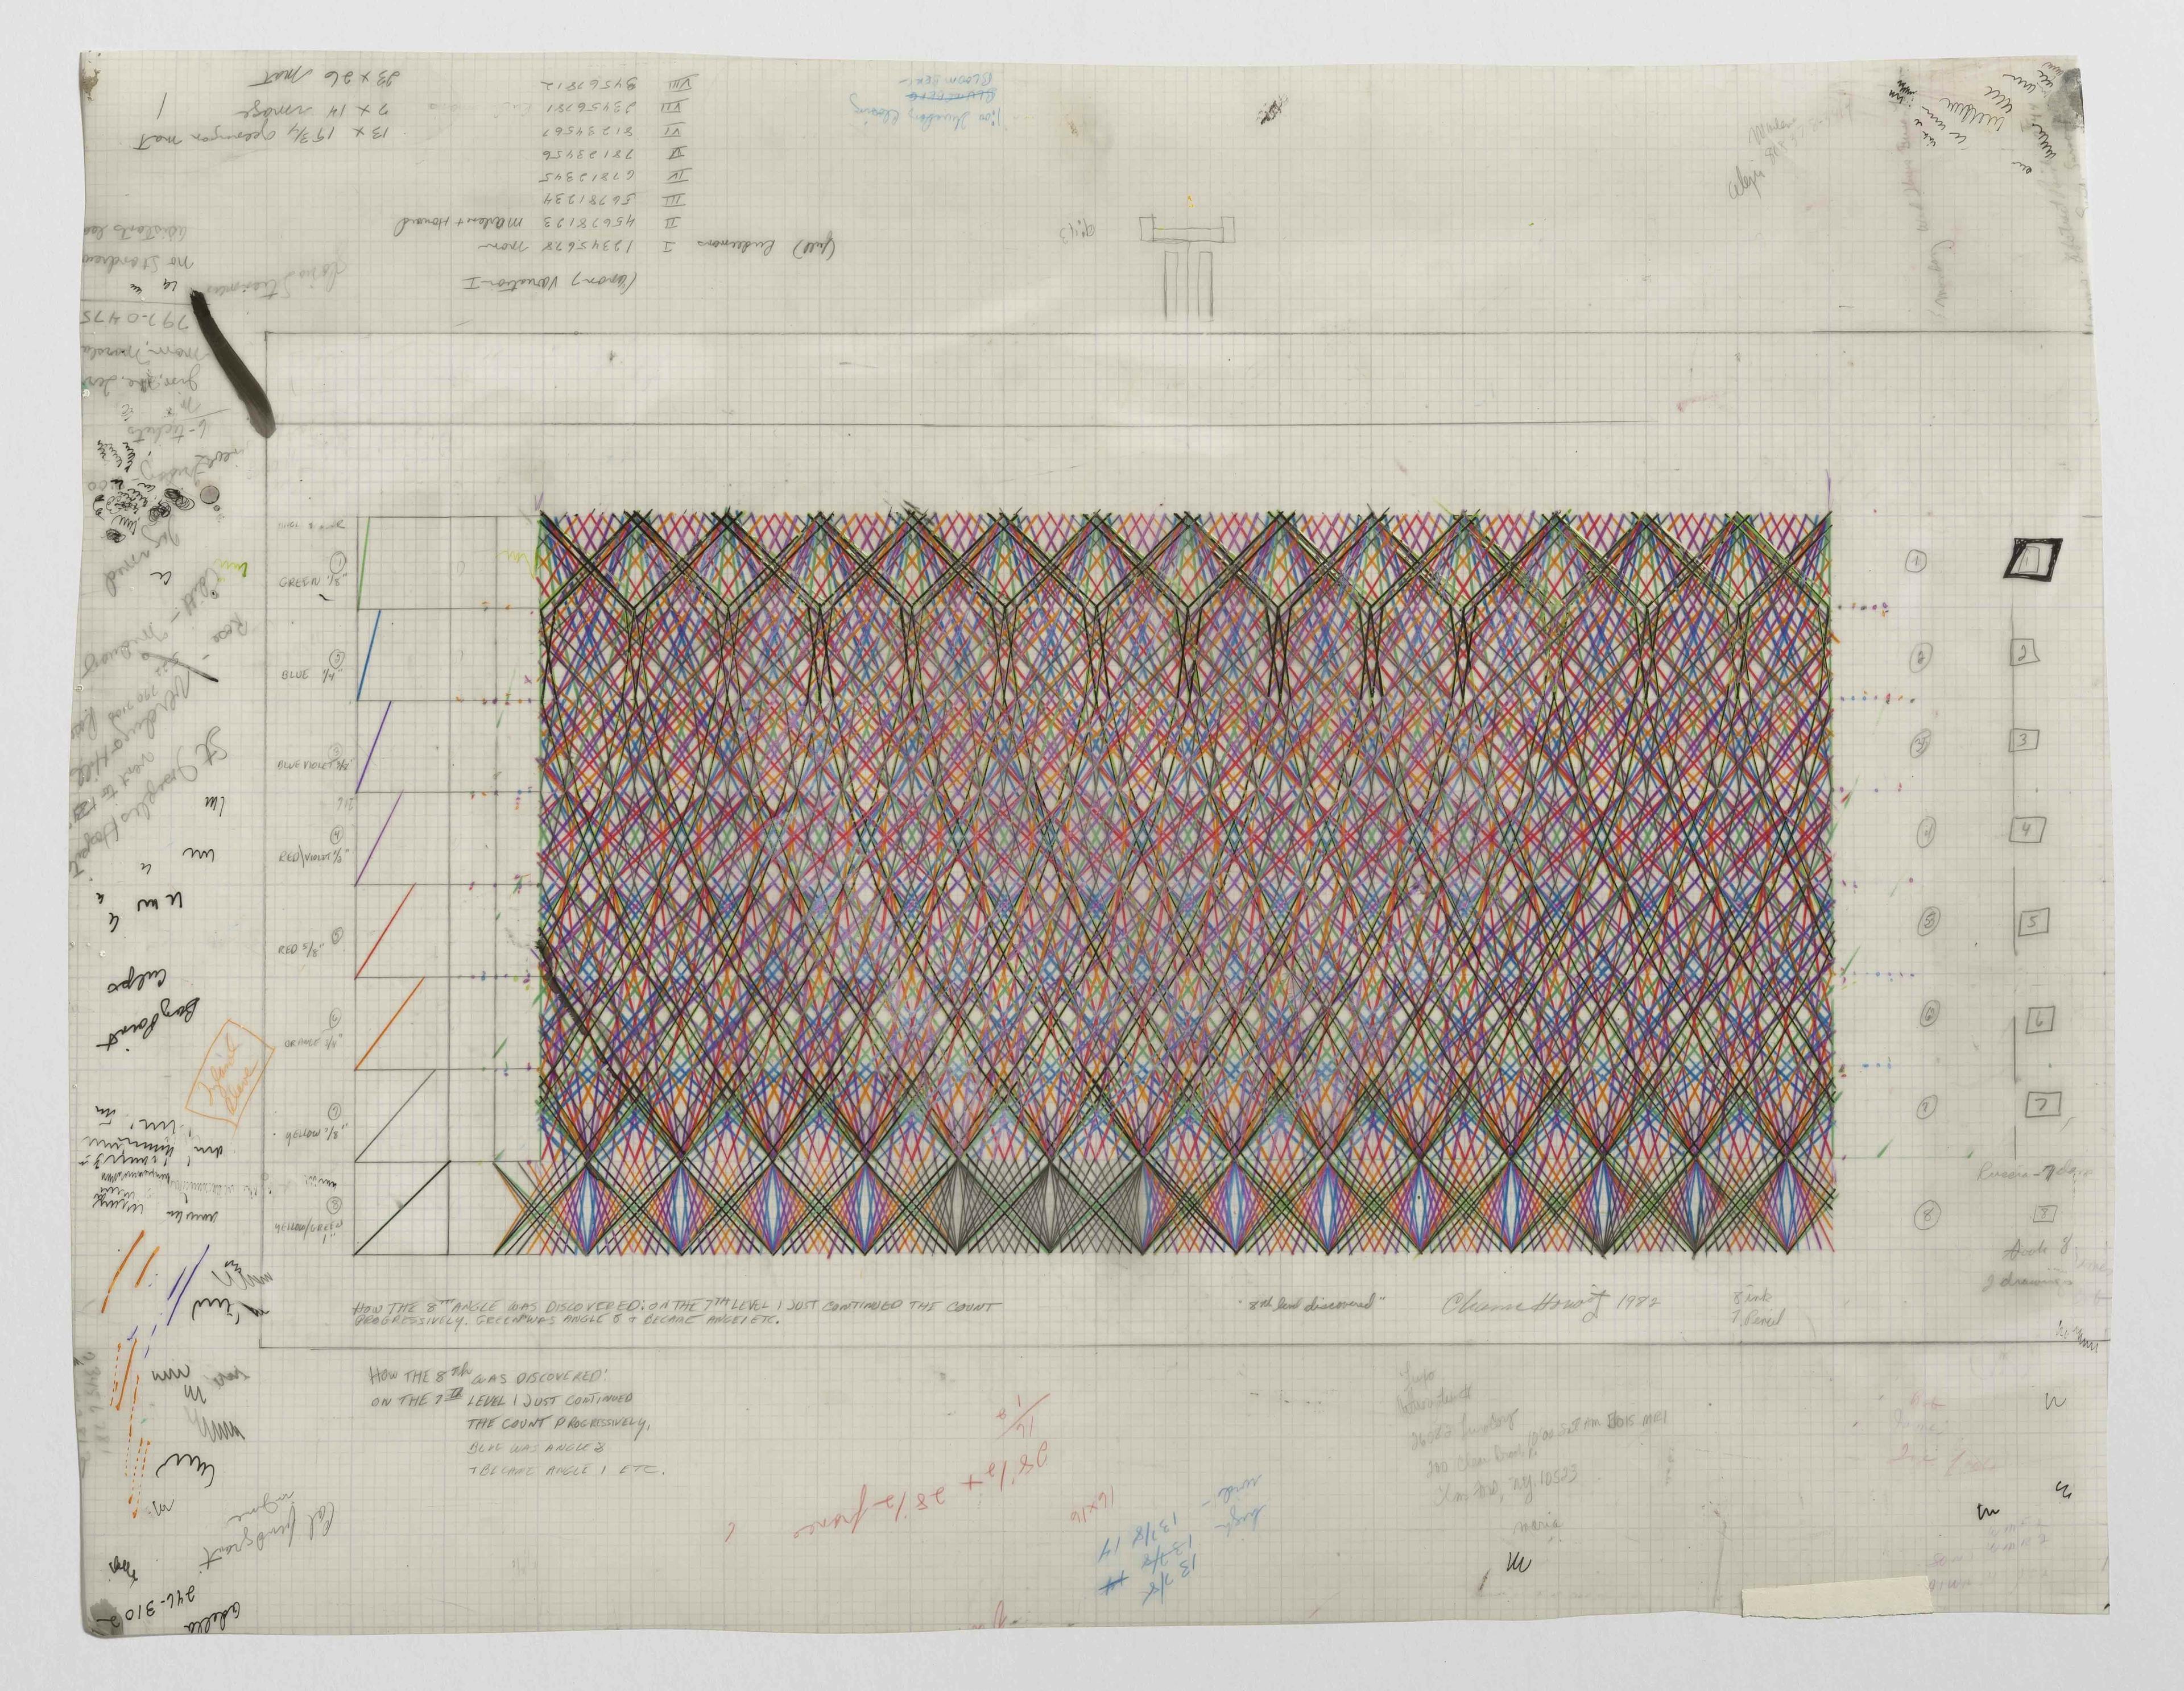 An abstract drawing on graph paper made of many intersecting colourful lines creating a diamond-like pattern on the top and bottom. Around the edge of the paper are handwritten notes and scribbles.